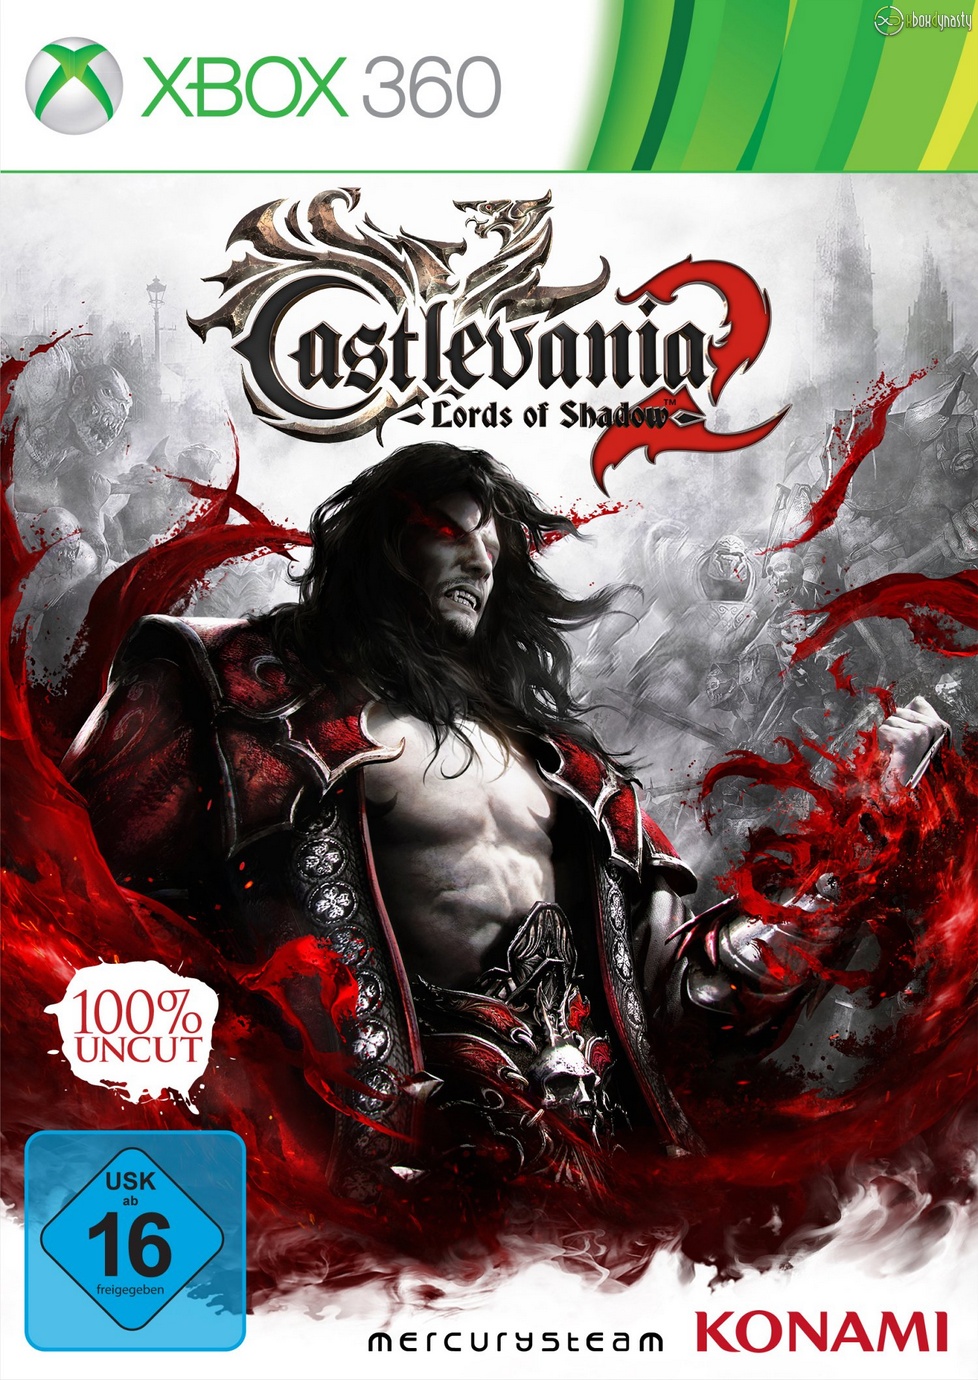 Xbox 360 - Castlevania Lords of Shadow 2